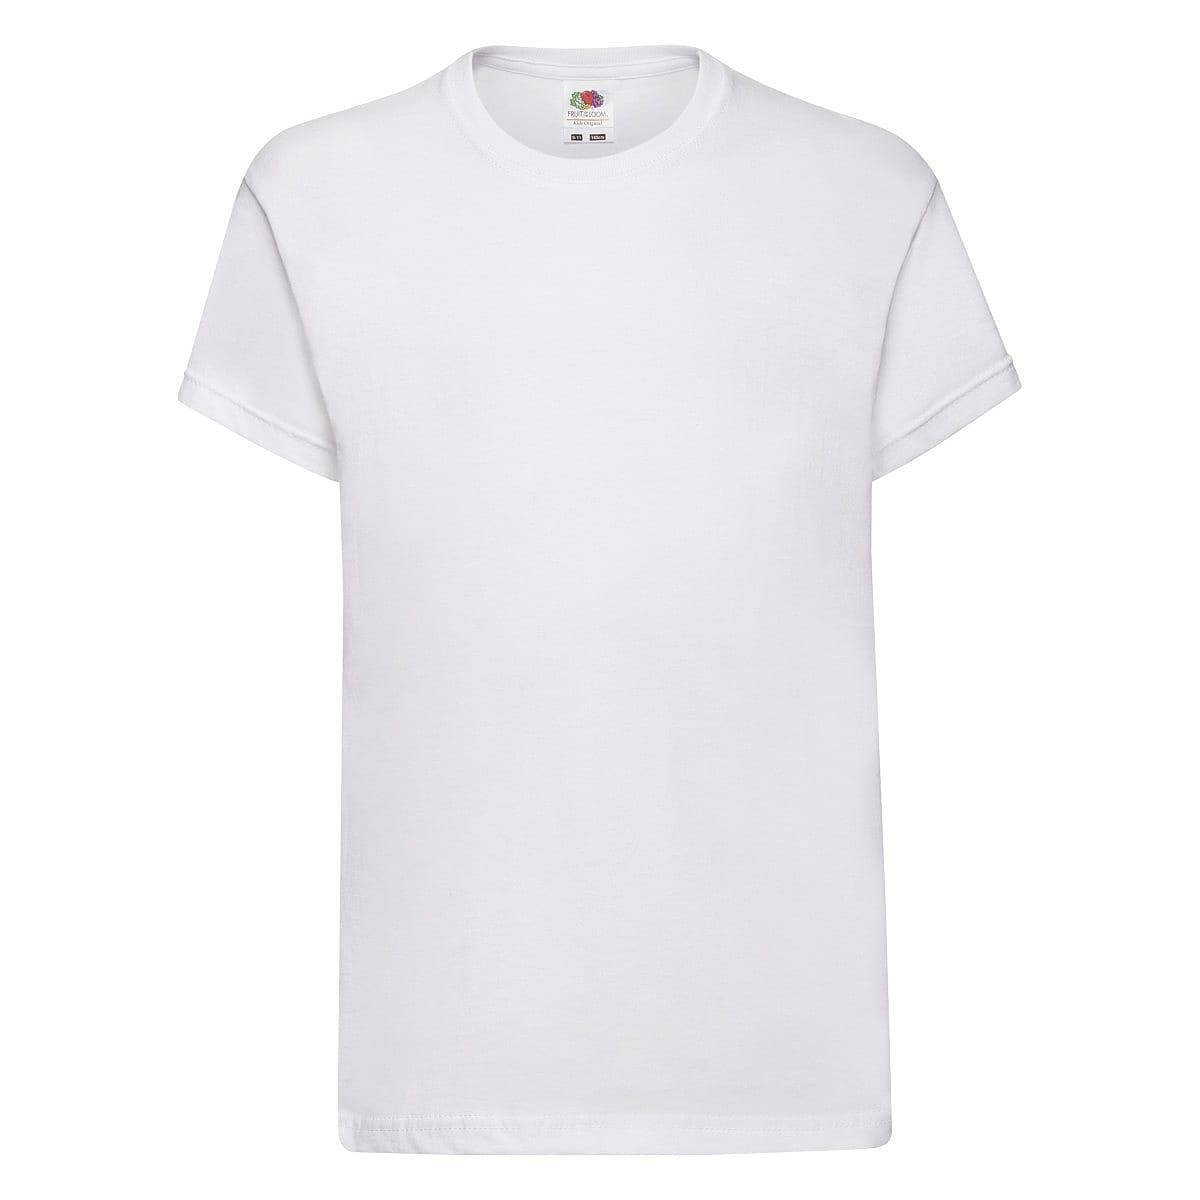 Fruit Of The Loom Kids Original T-Shirt in White (Product Code: 61019)